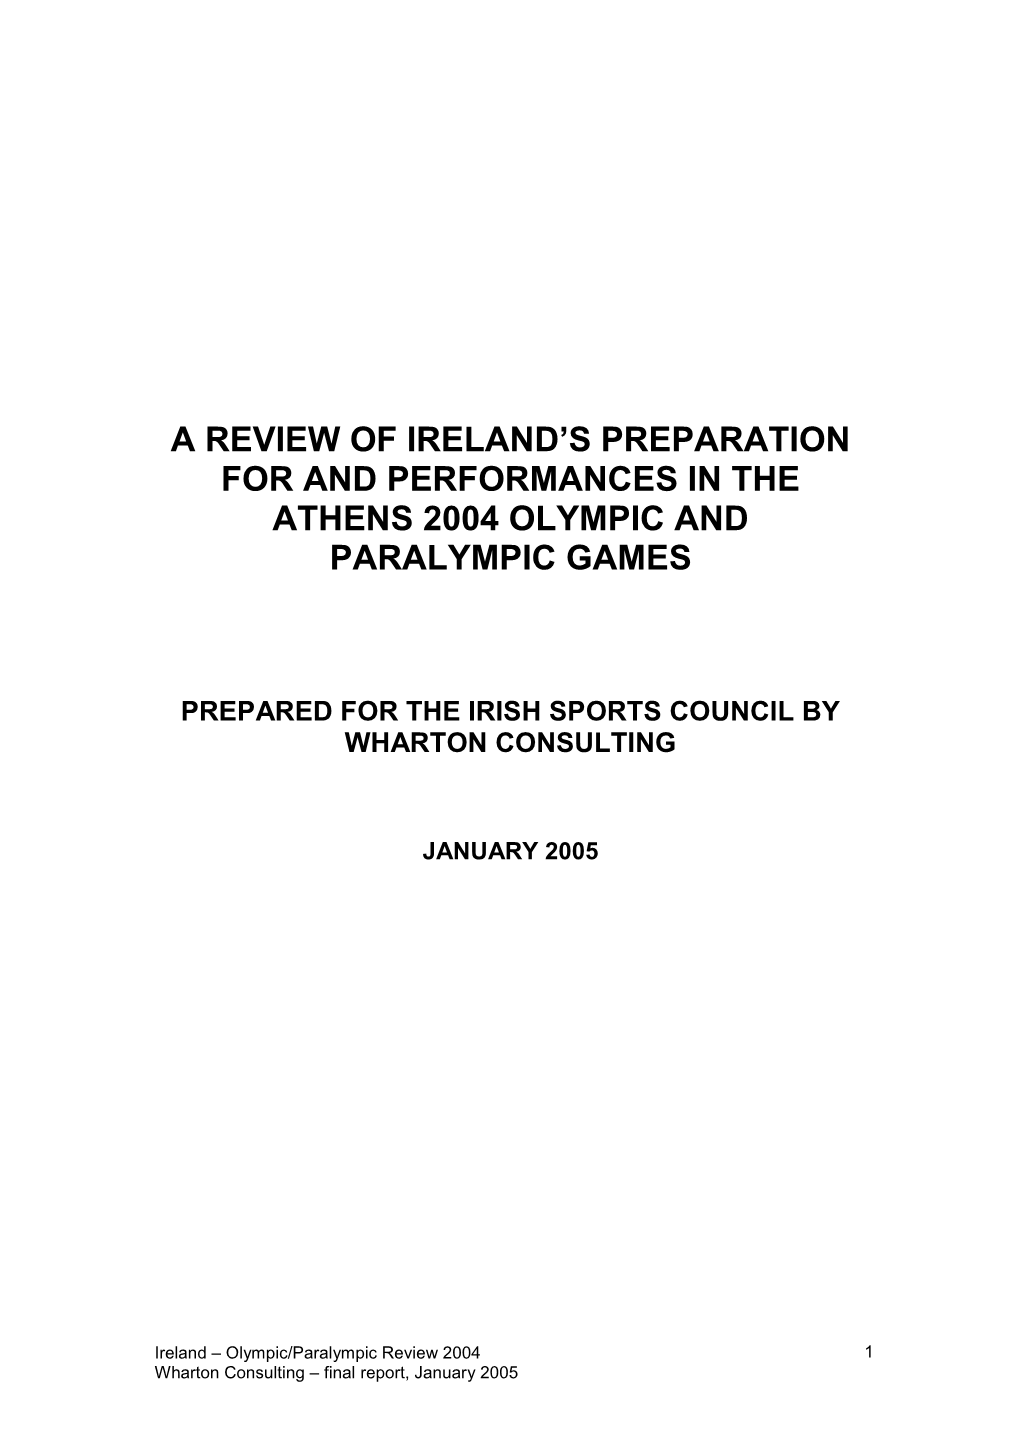 A Review of Ireland's Preparation for and Performances in the Athens 2004 Olympic and Paralympic Games